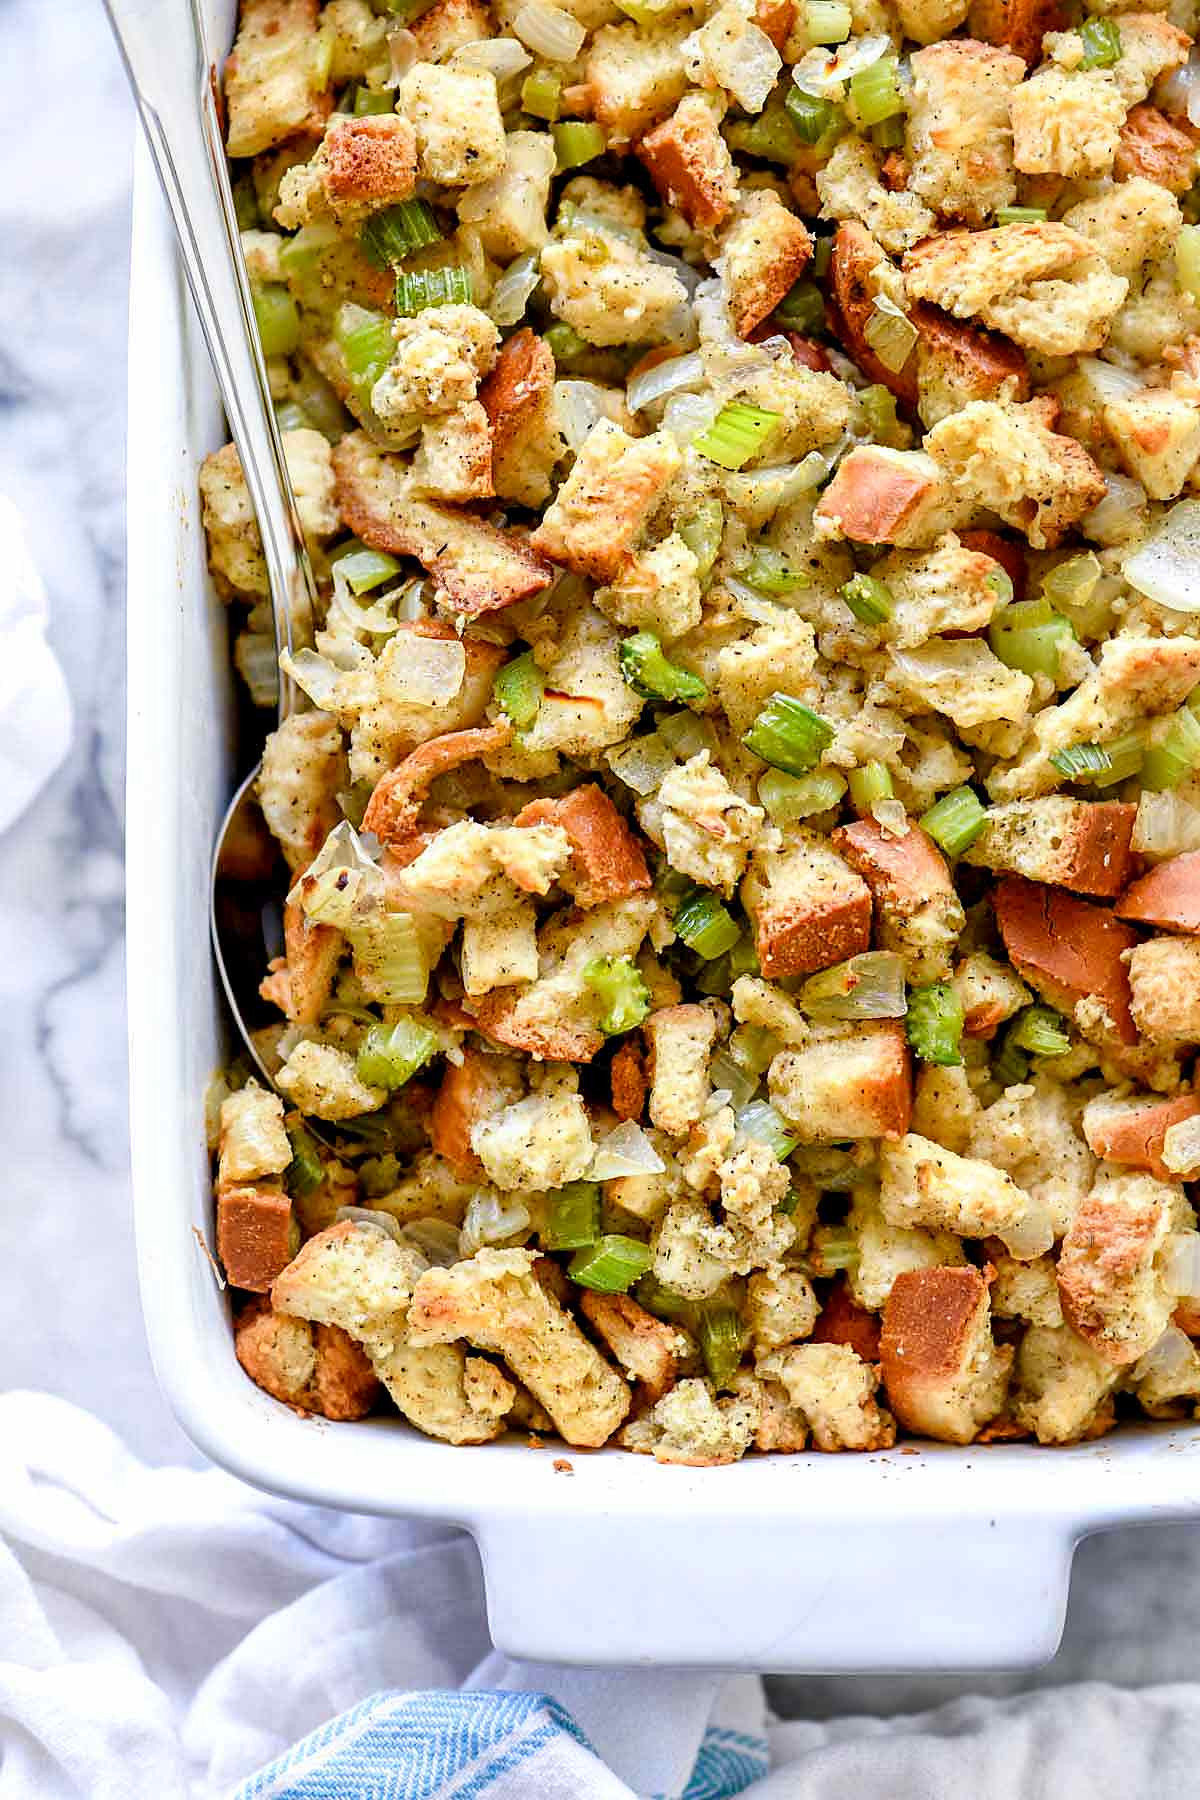 Easy Thanksgiving Dressing Recipe
 The BEST Stuffing Recipe Traditional Stuffing